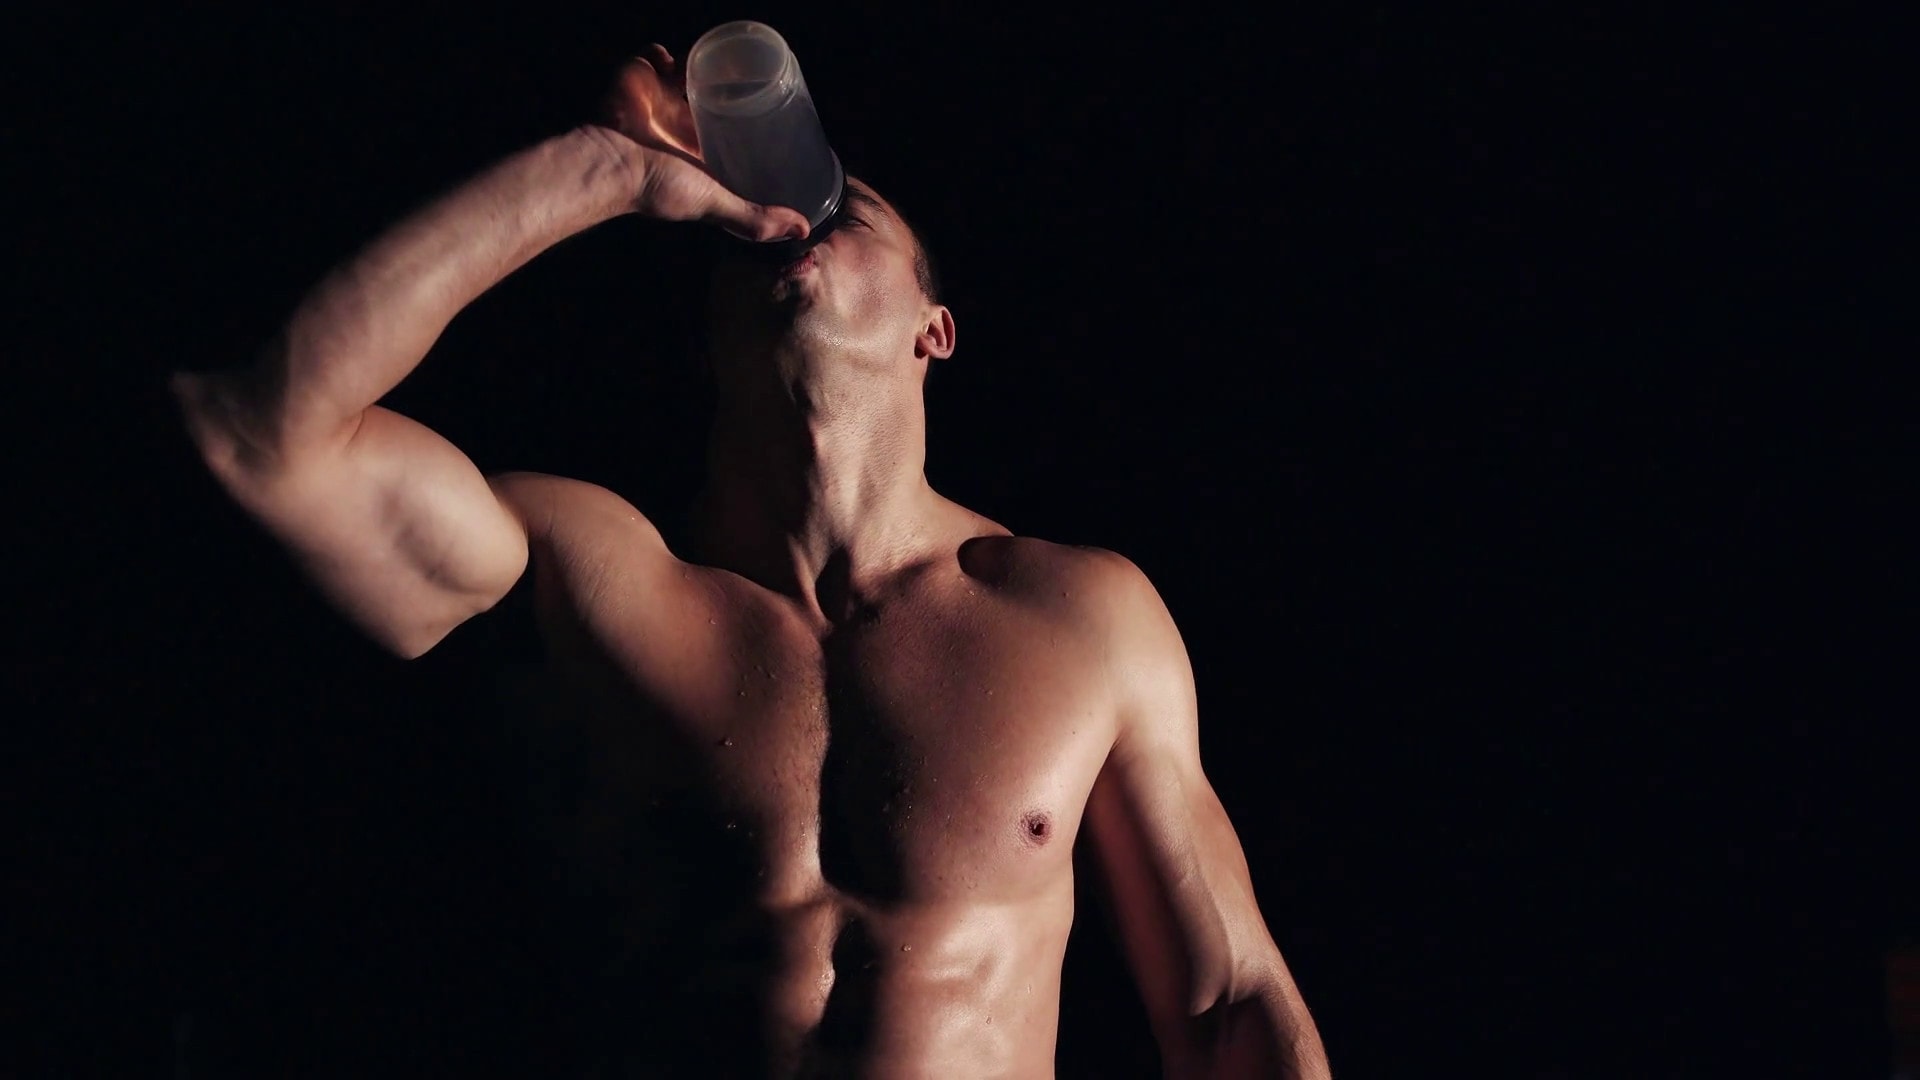 Bình Lắc Nhựa MADI Chính Hãng (700ml) - fit muscular man drinking water or energy drink as he takes a break from working out in a darkened gym close up chest and head showing his strong physique looking into camera rwg emxkqg thumbnail full05